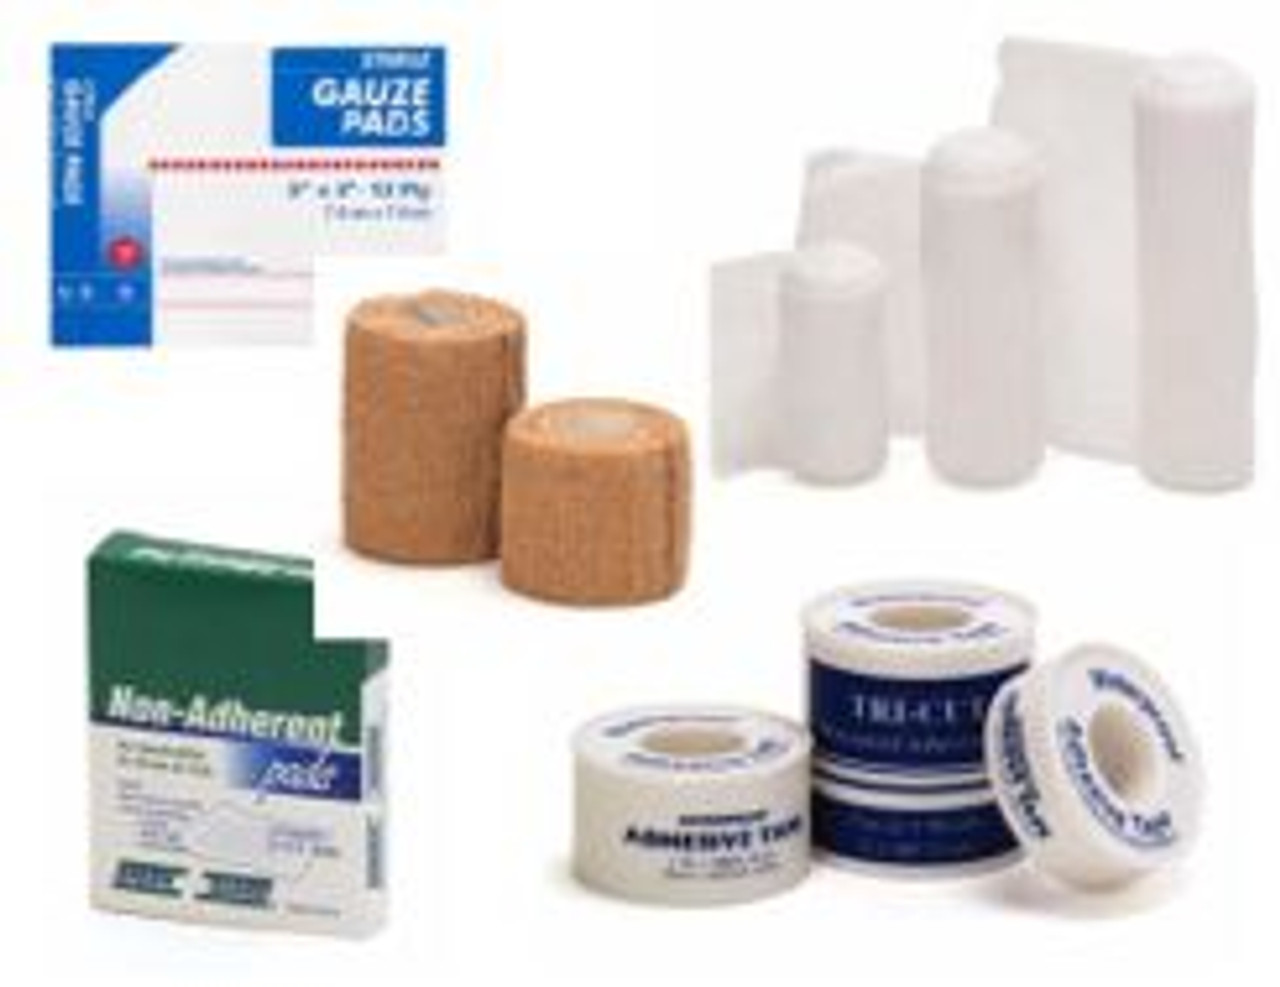 Rite Aid First Aid Gauze Pads, Variety Pack - Includes 25 Assorted Gauze  Pads & Tape | Sterile Gauze Pads | First Aid Kit | Wound Care Supplies